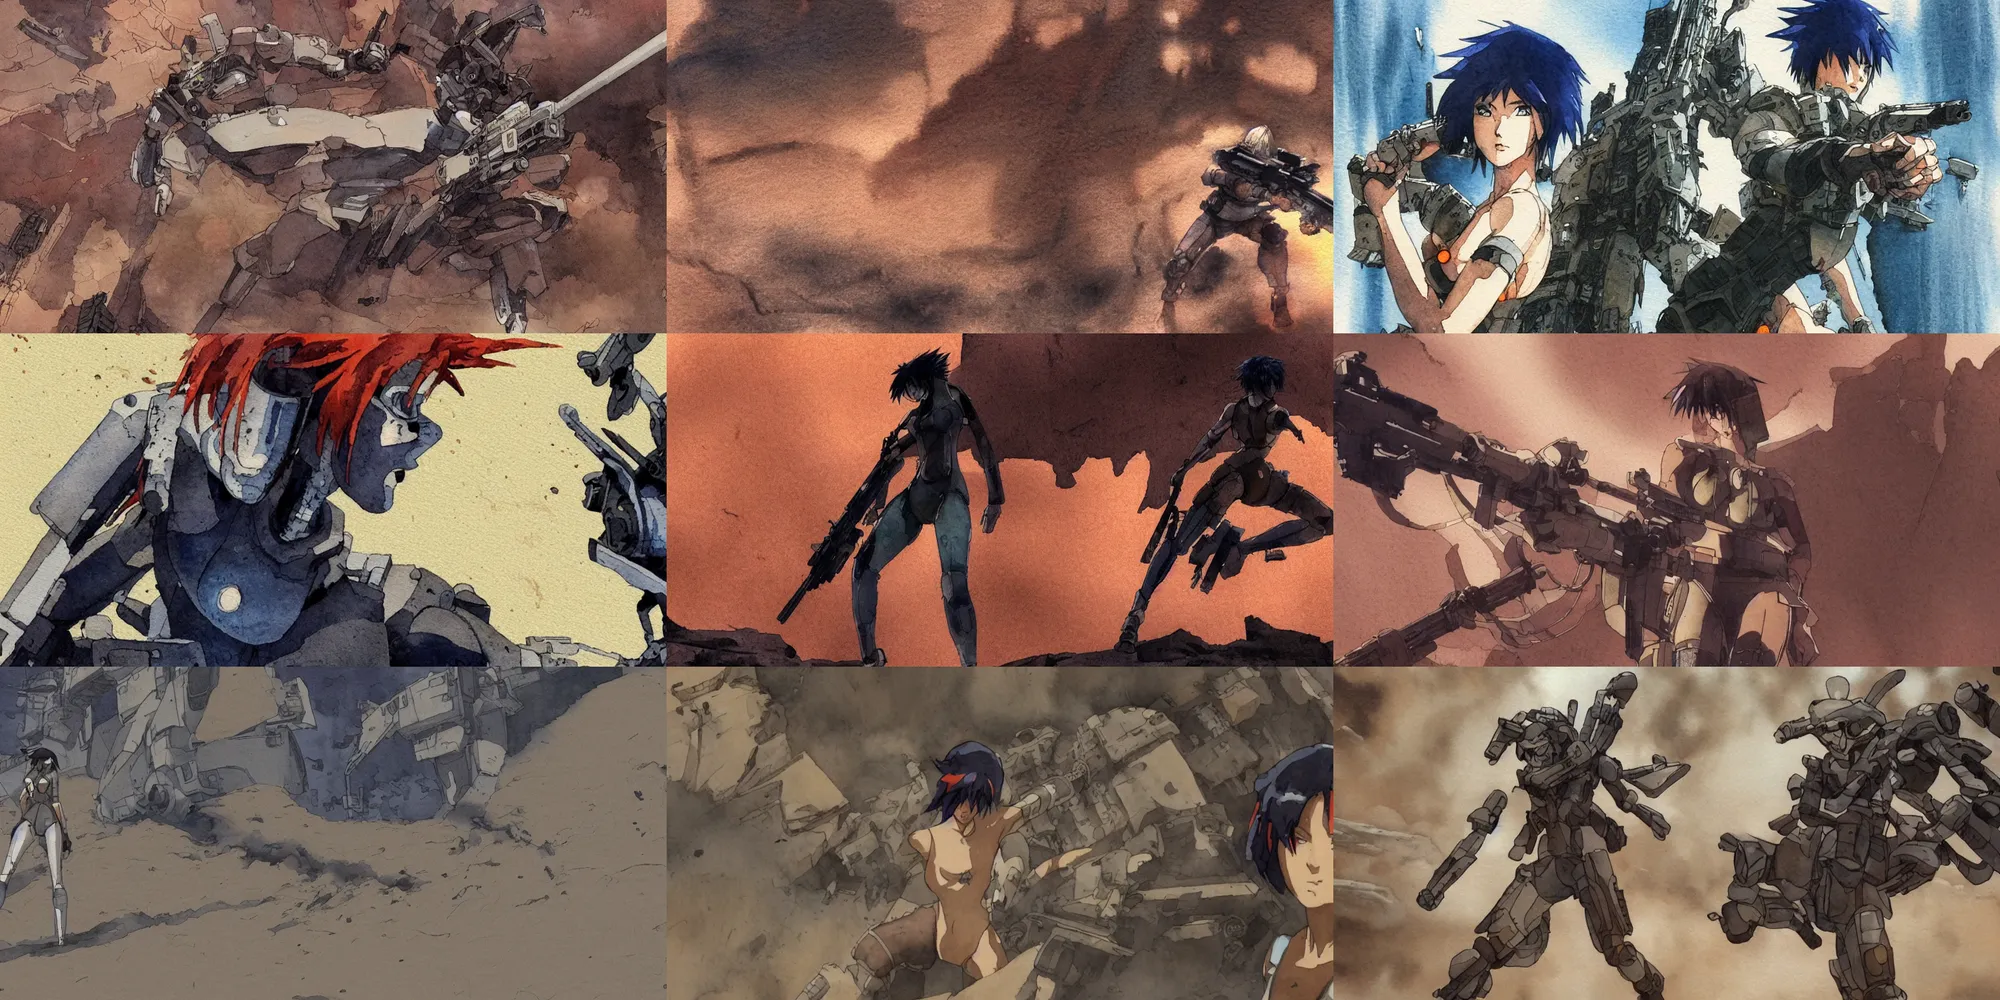 Prompt: incredible screenshot, simple watercolor, masamune shirow ghost in the shell movie scene close up broken Kusanagi tank battle,, battle in the grand canyon, sand dunes, cracks, brown mud, dust, impossible geometry, falling apart, last man standing, memorable scene, raging forest fire, red, blue, orange, cool hair, melting, danger, sniper, death, chaos, bodies on the ground, heavy rain, pipe jungle, reflections, refraction, bounce light, phil hale, rim light, bokeh ,hd, 4k, remaster, dynamic camera angle, deep 3 point perspective, fish eye, dynamic scene